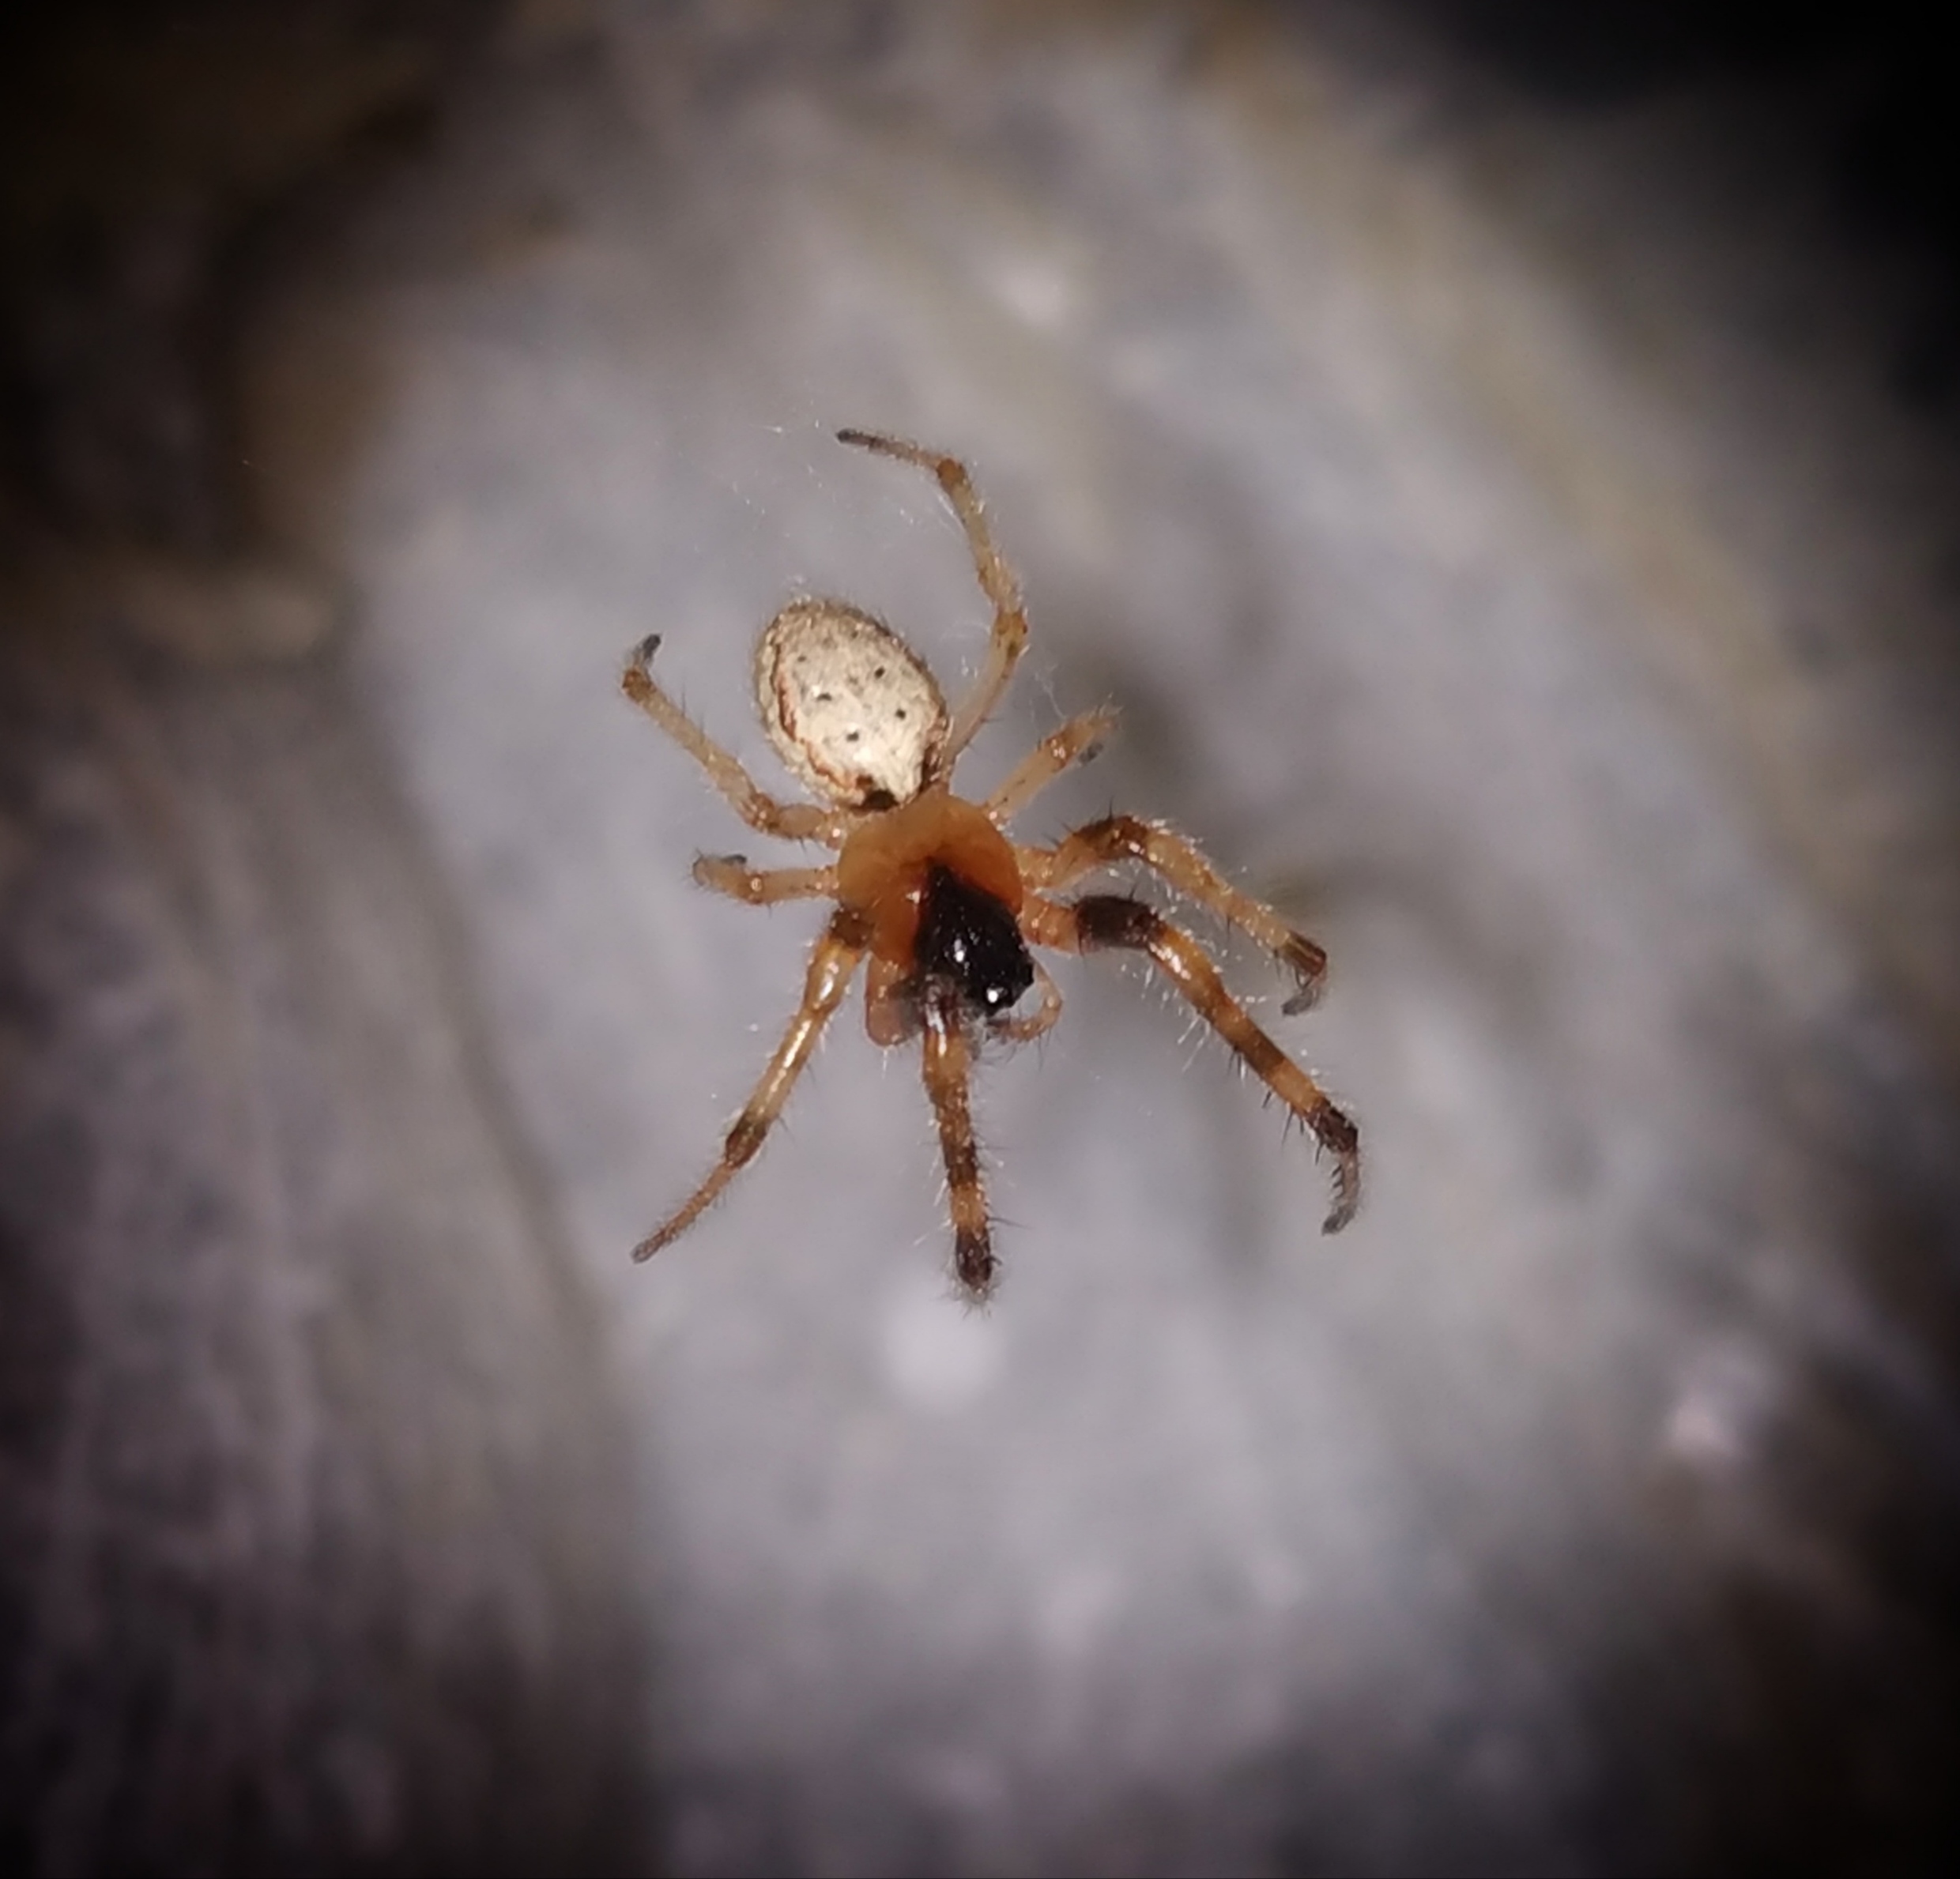 A spider on a flat surface